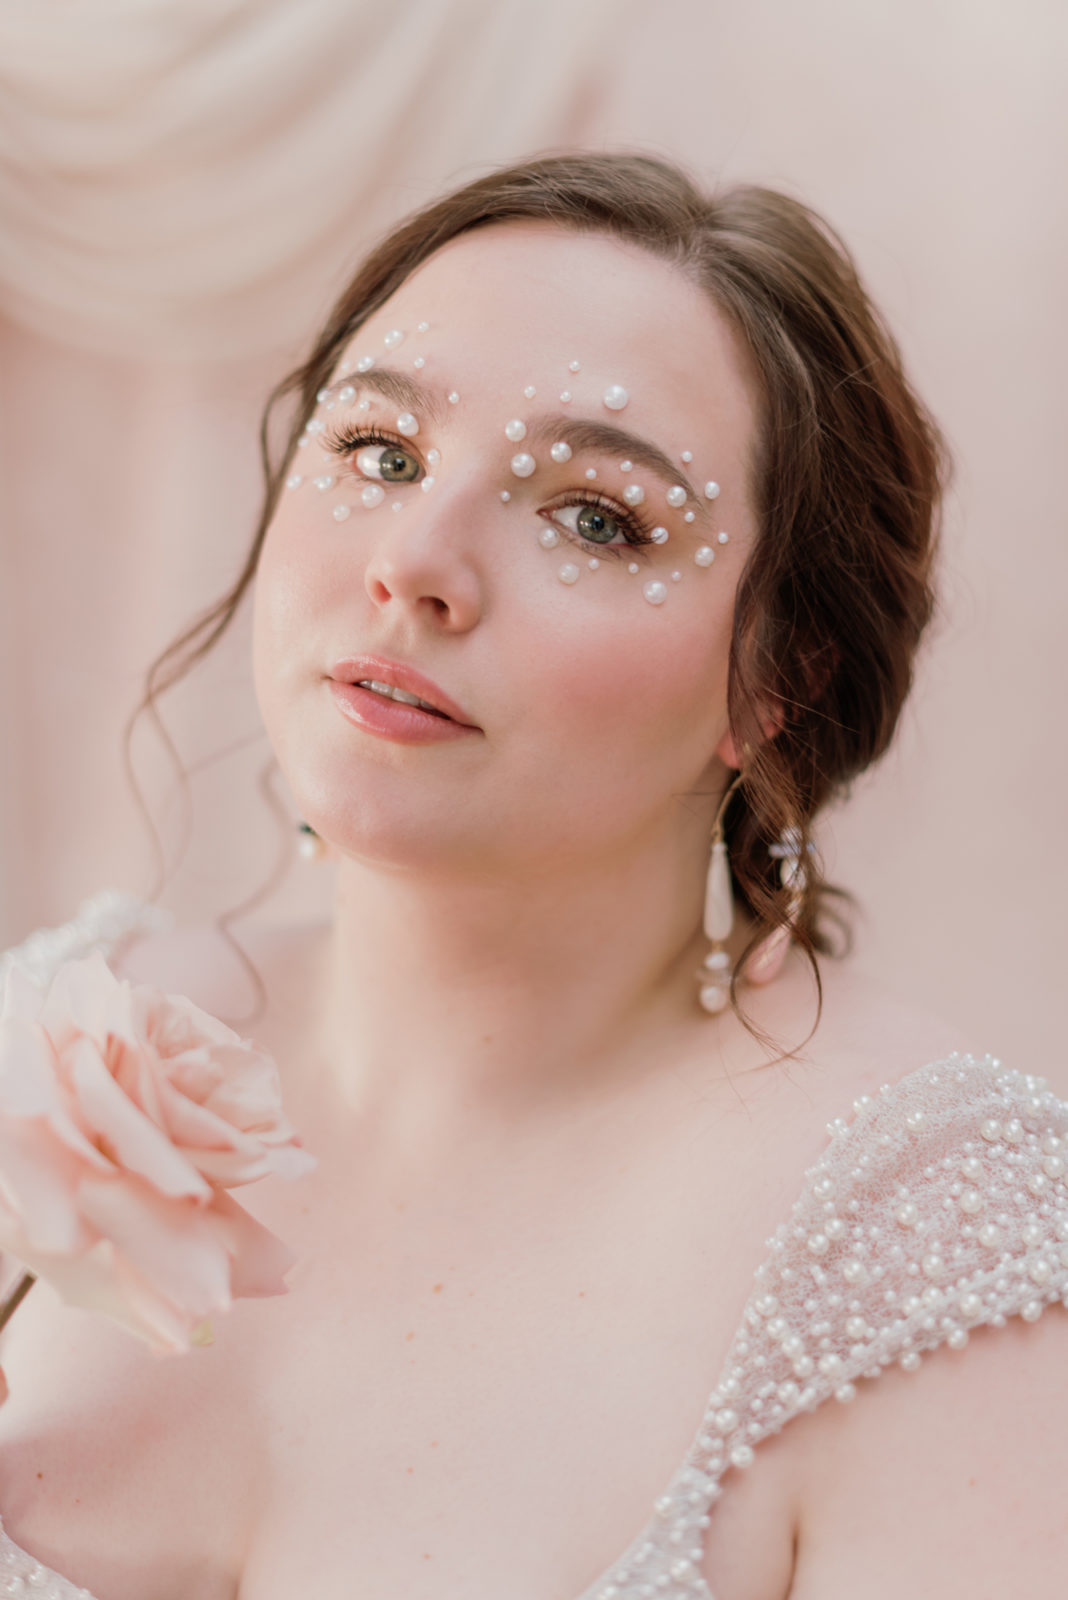 Bridal inspiration for romantic pearl themed eye makeup to match a pearl studded gown